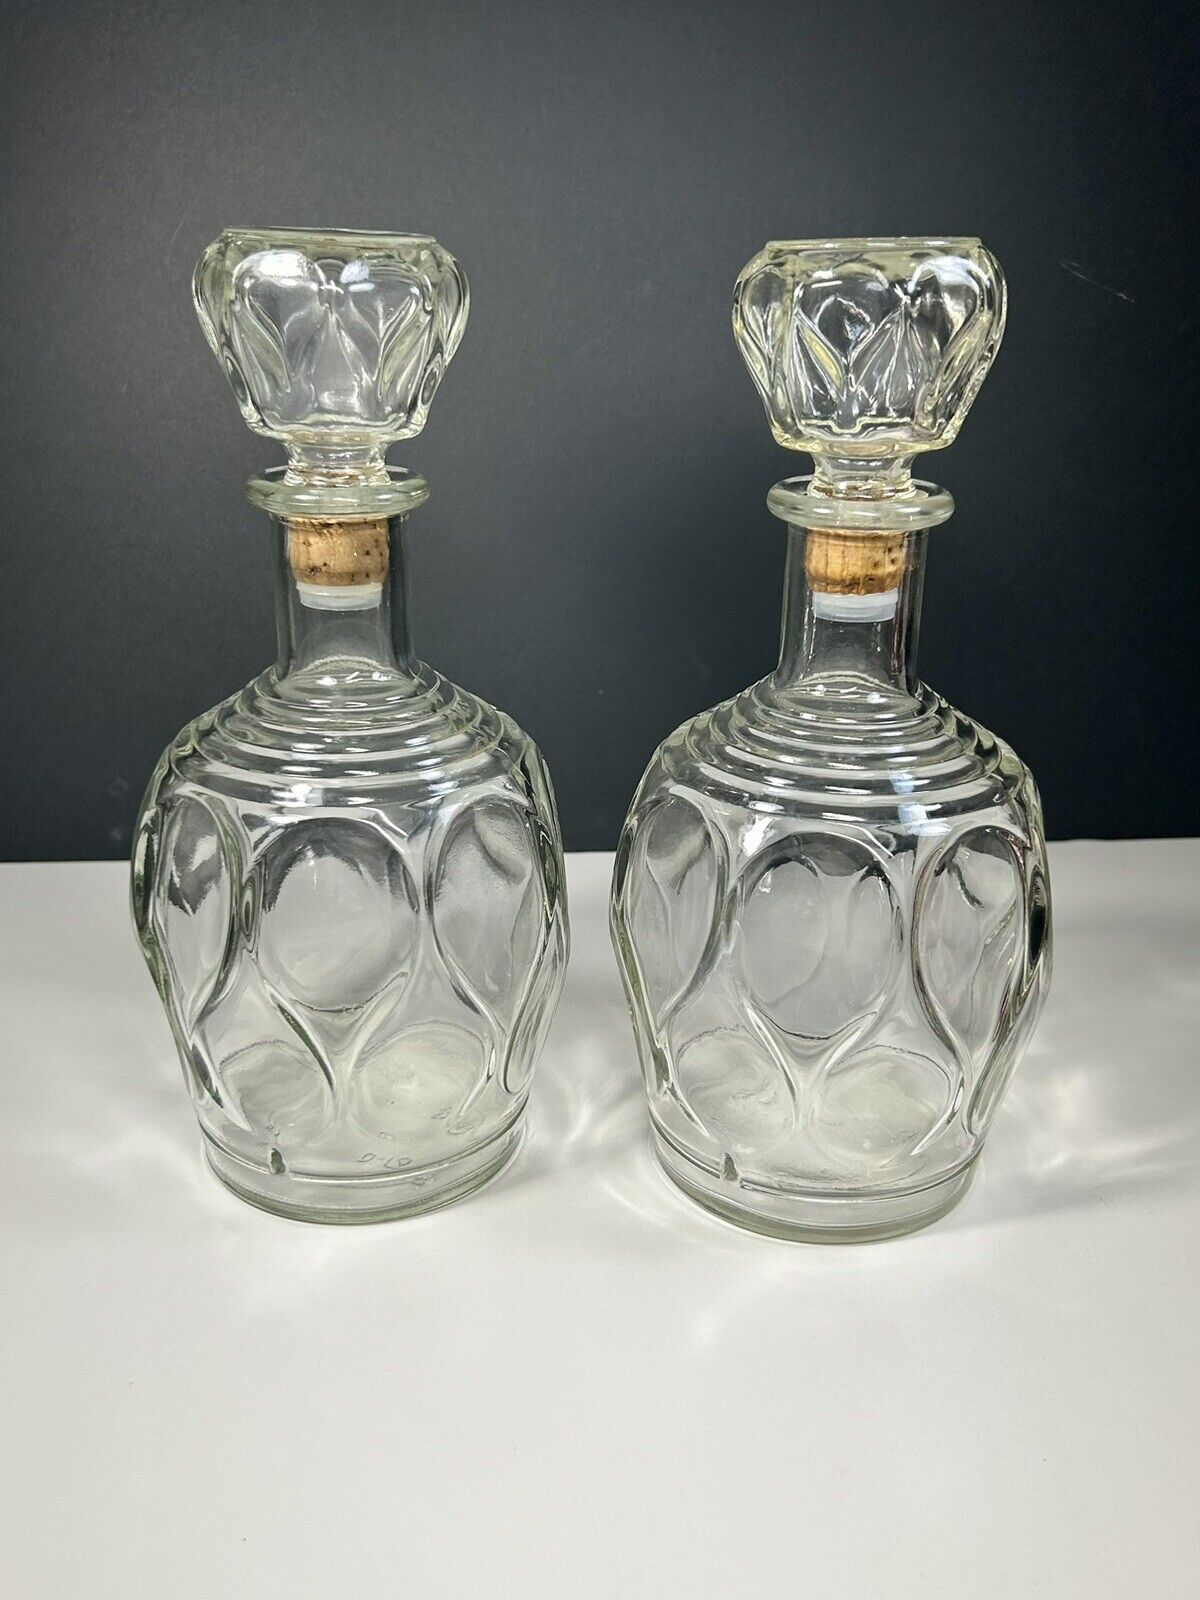 Lot of 2 Vintage Clear Glass Matching Decanters Teardrop Thumbprint